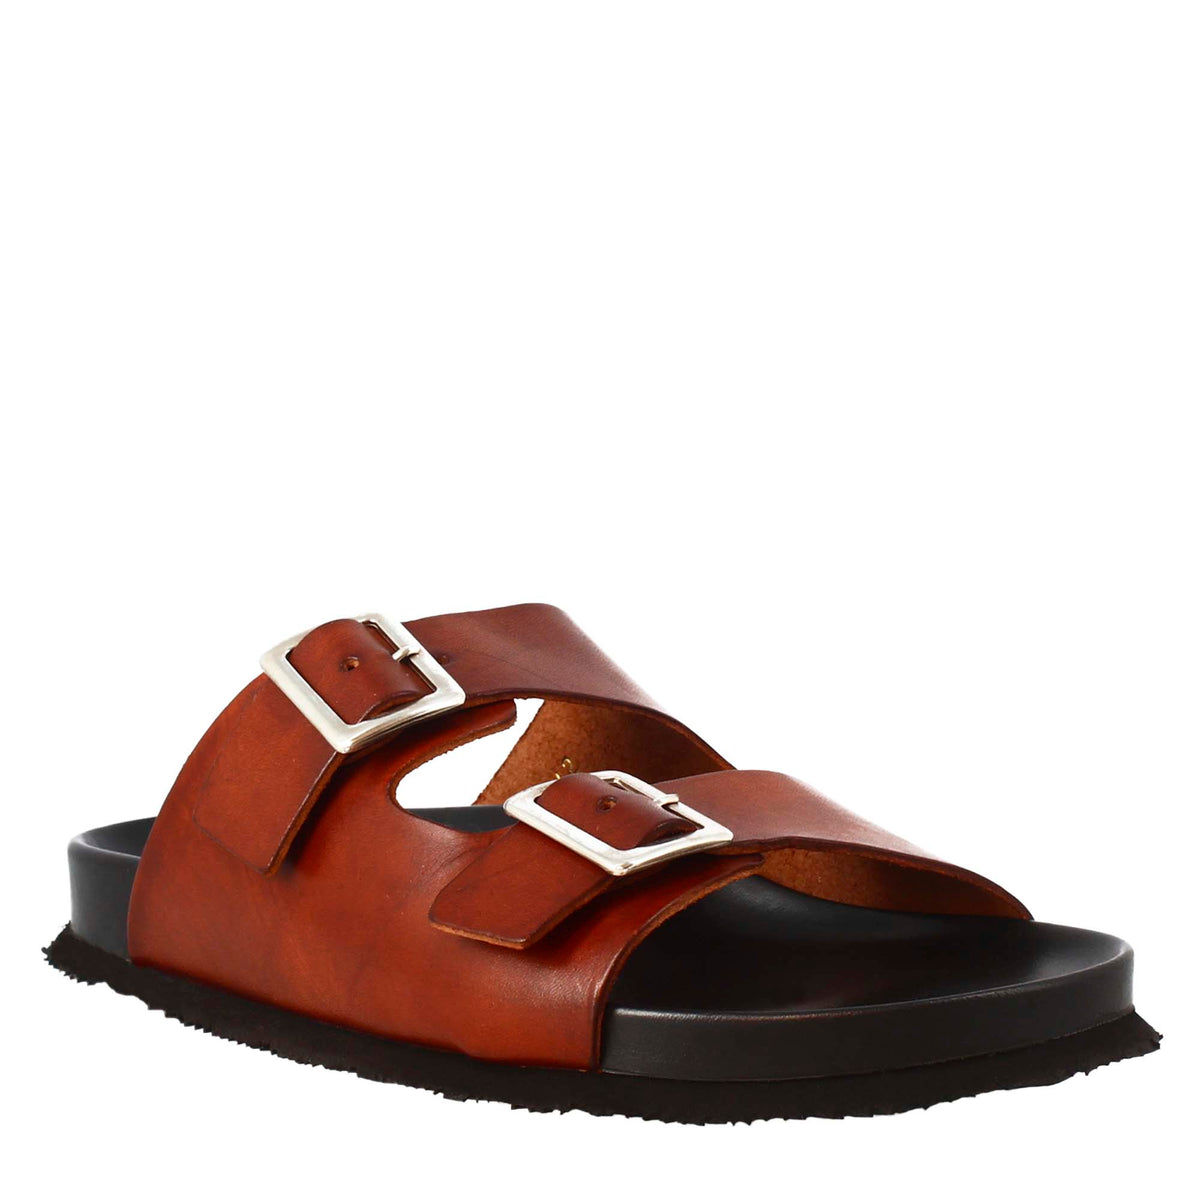 Handmade men's sandals in tan blue calf leather with buckle